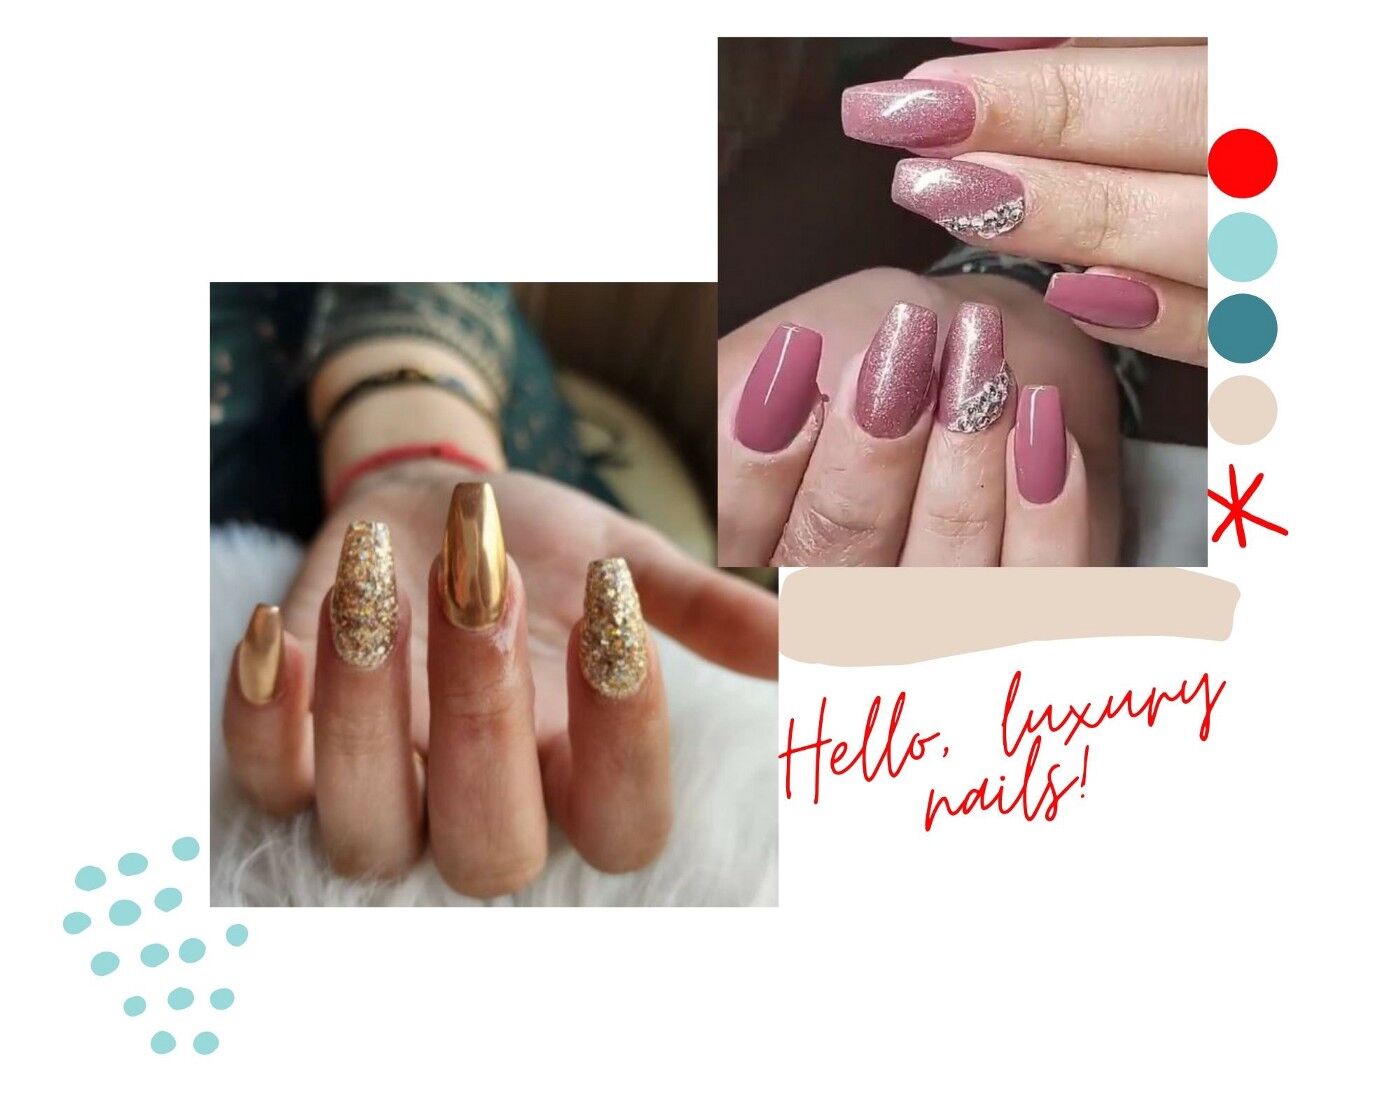 10 To 1 Or 1:30 To 5 Nail Art And Nail Extension Course